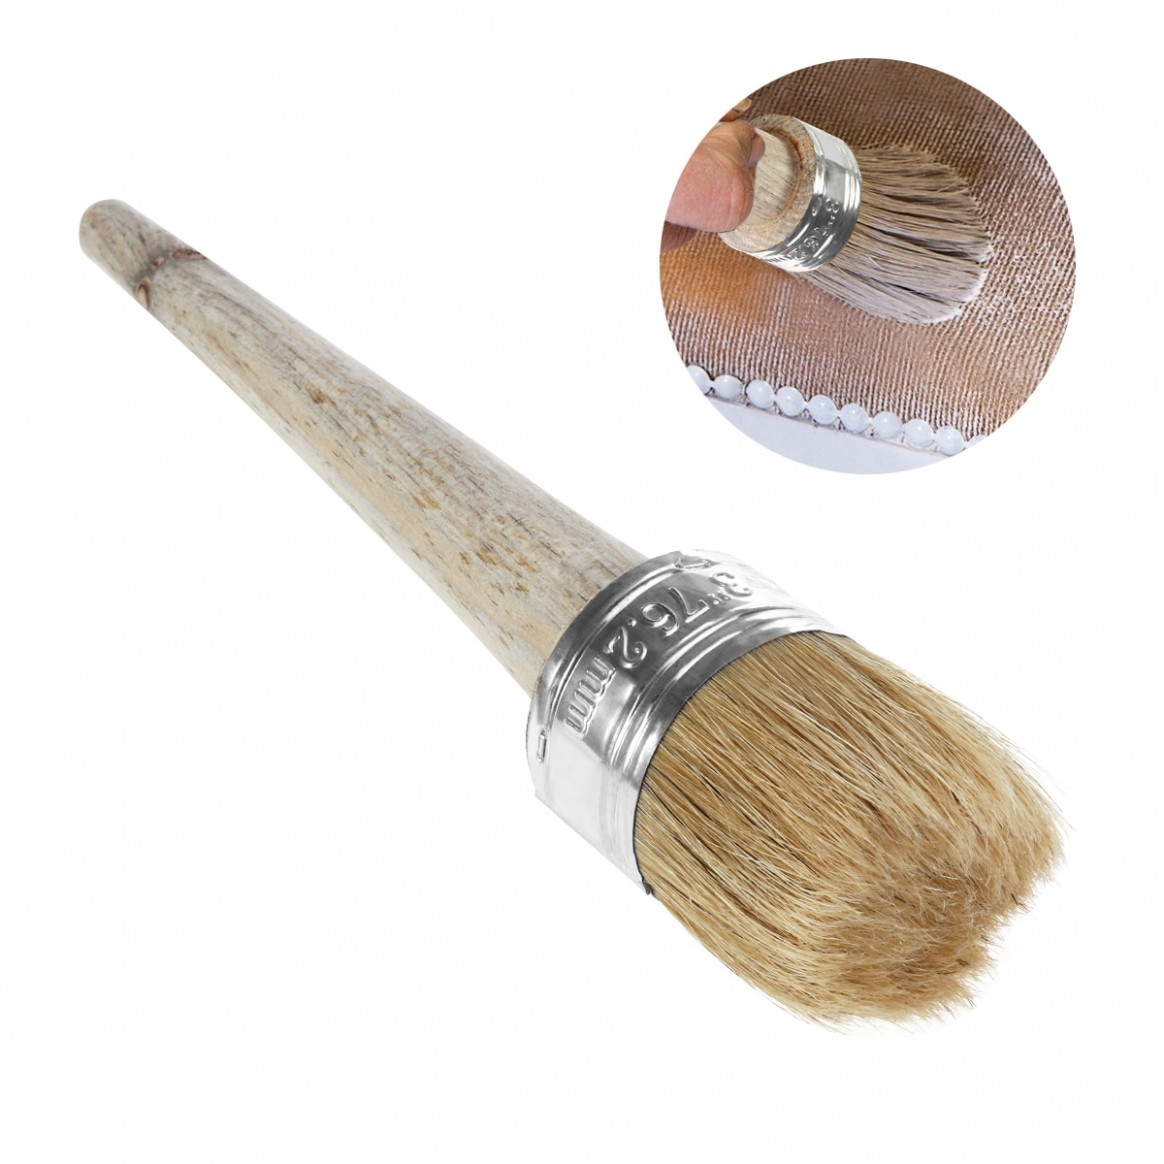 Us $10.10 10% Off|chalk Paint Wax Brush For Painting Or Waxing Furniture Stencils Folkart Home Decor Wood Large Brushes With Natural Bristles In Paint ..